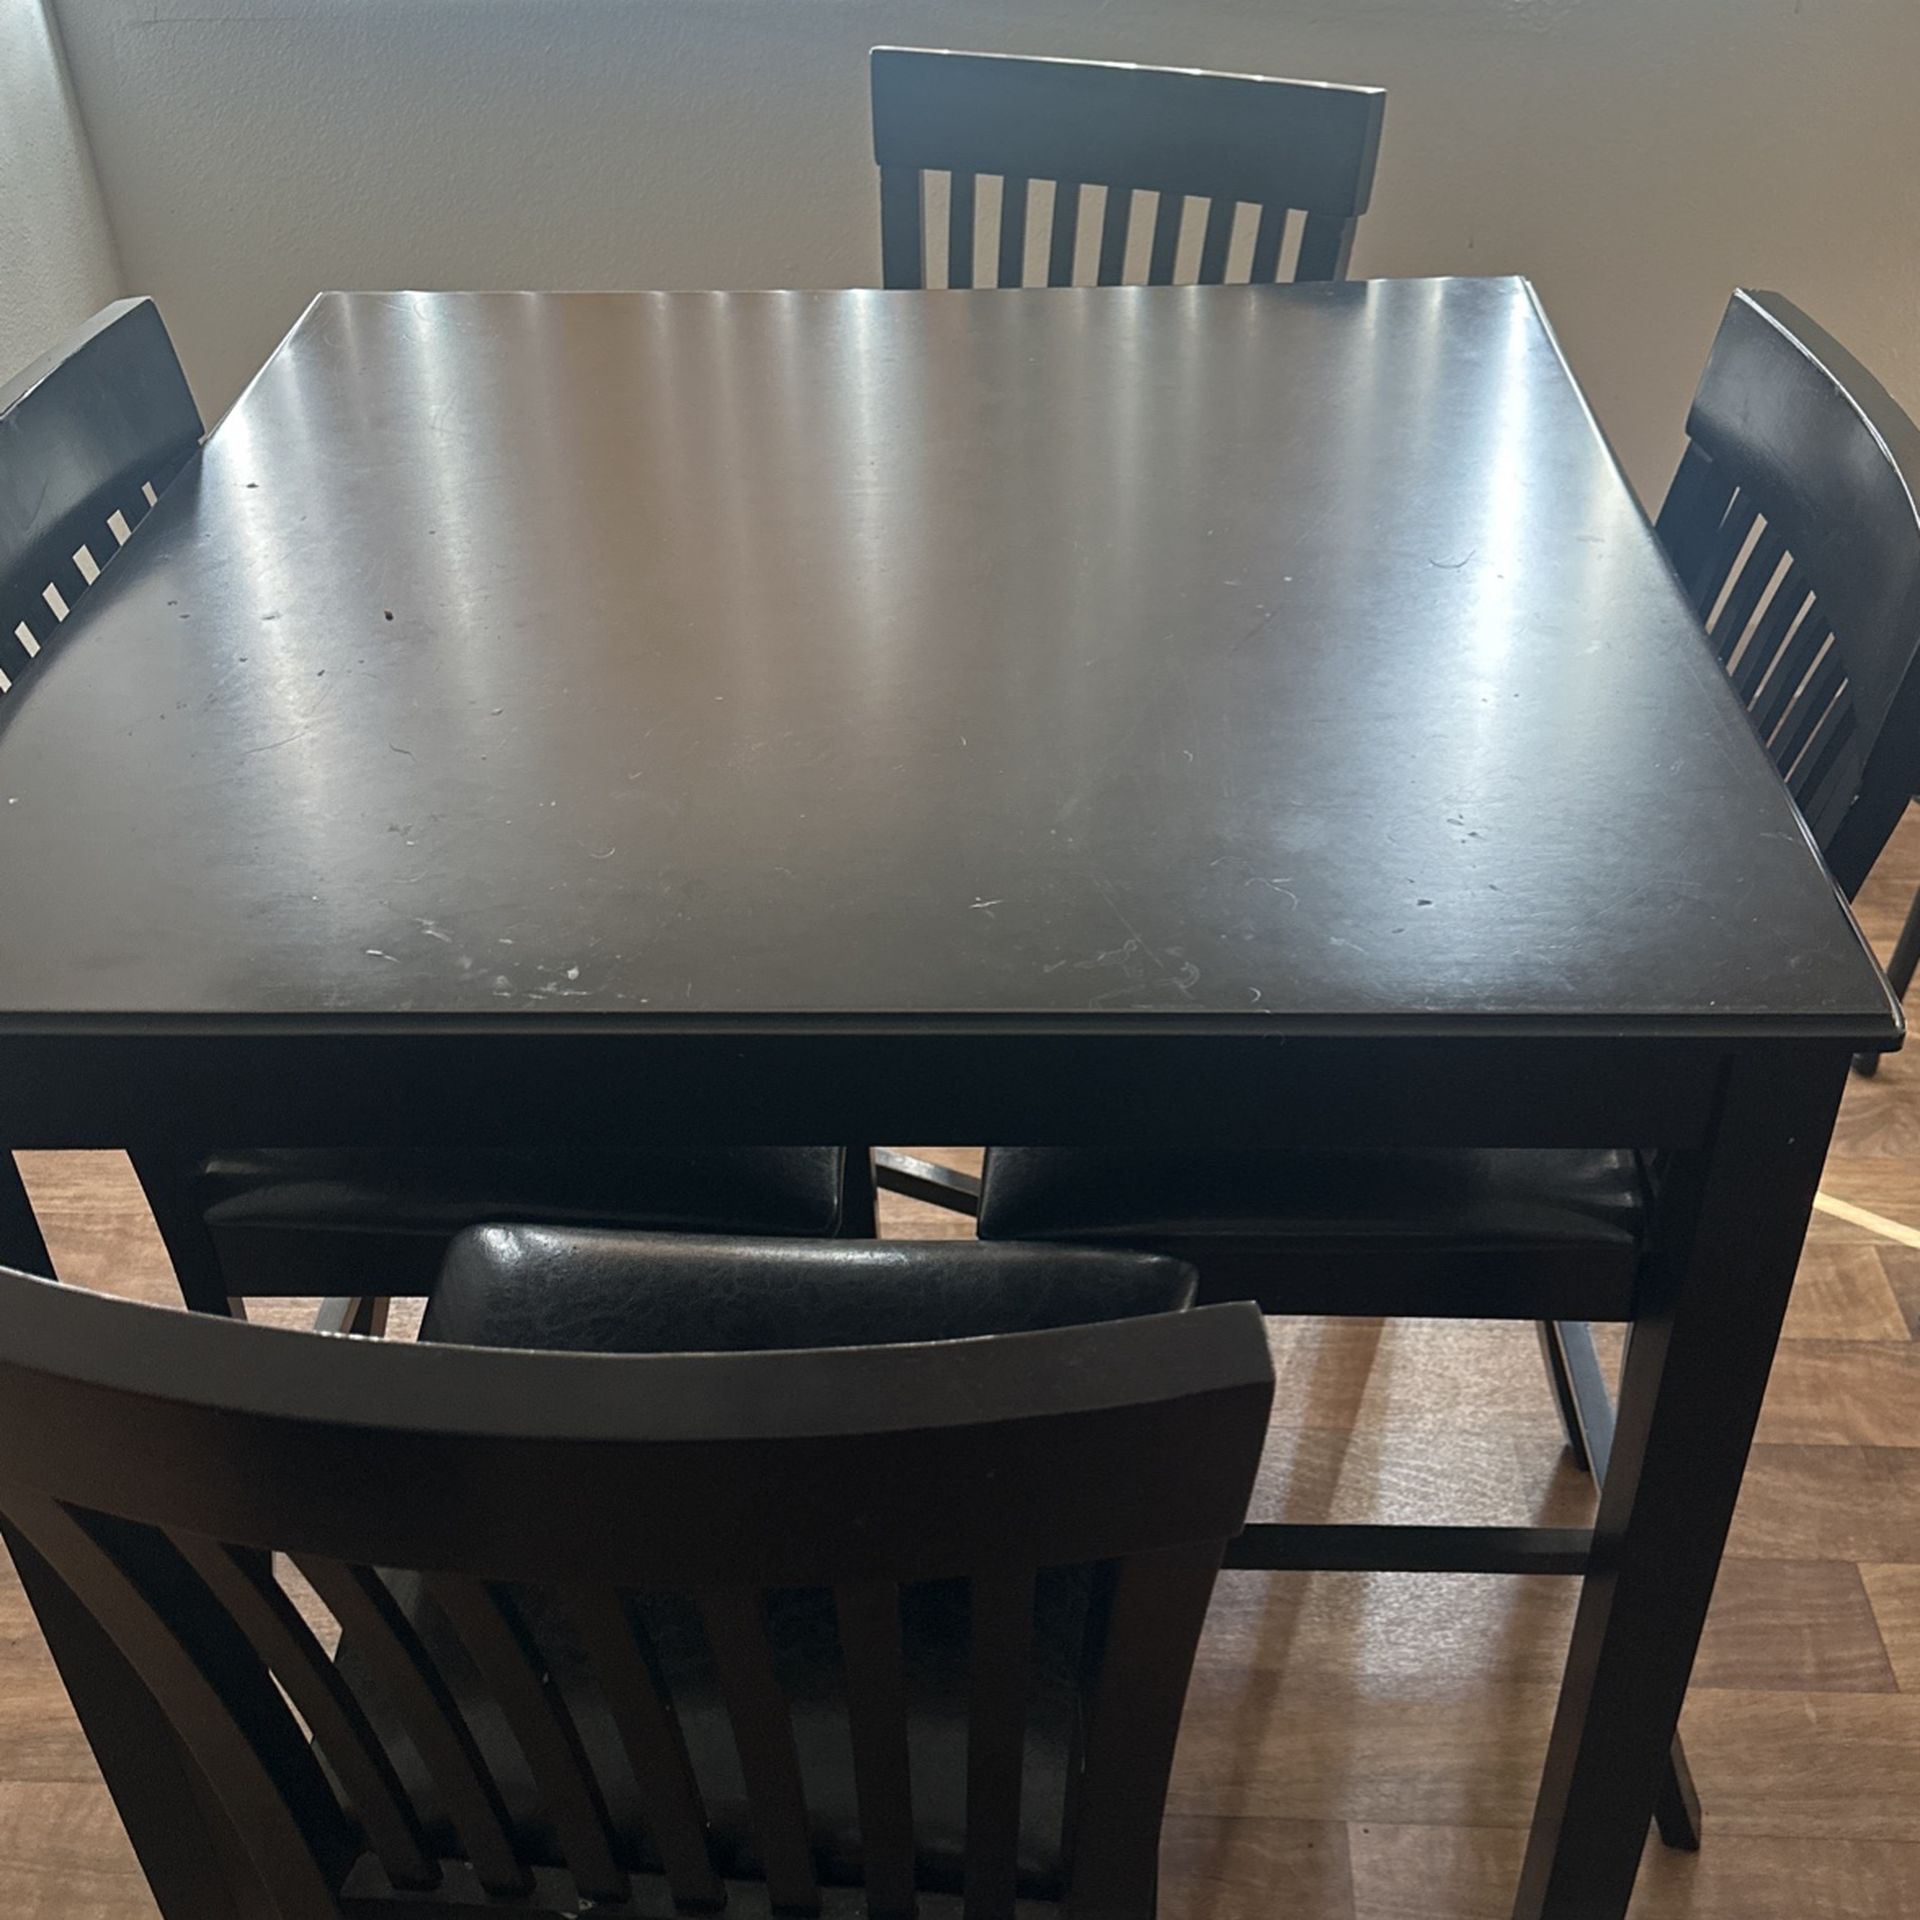 Gently Used Kitchen Table